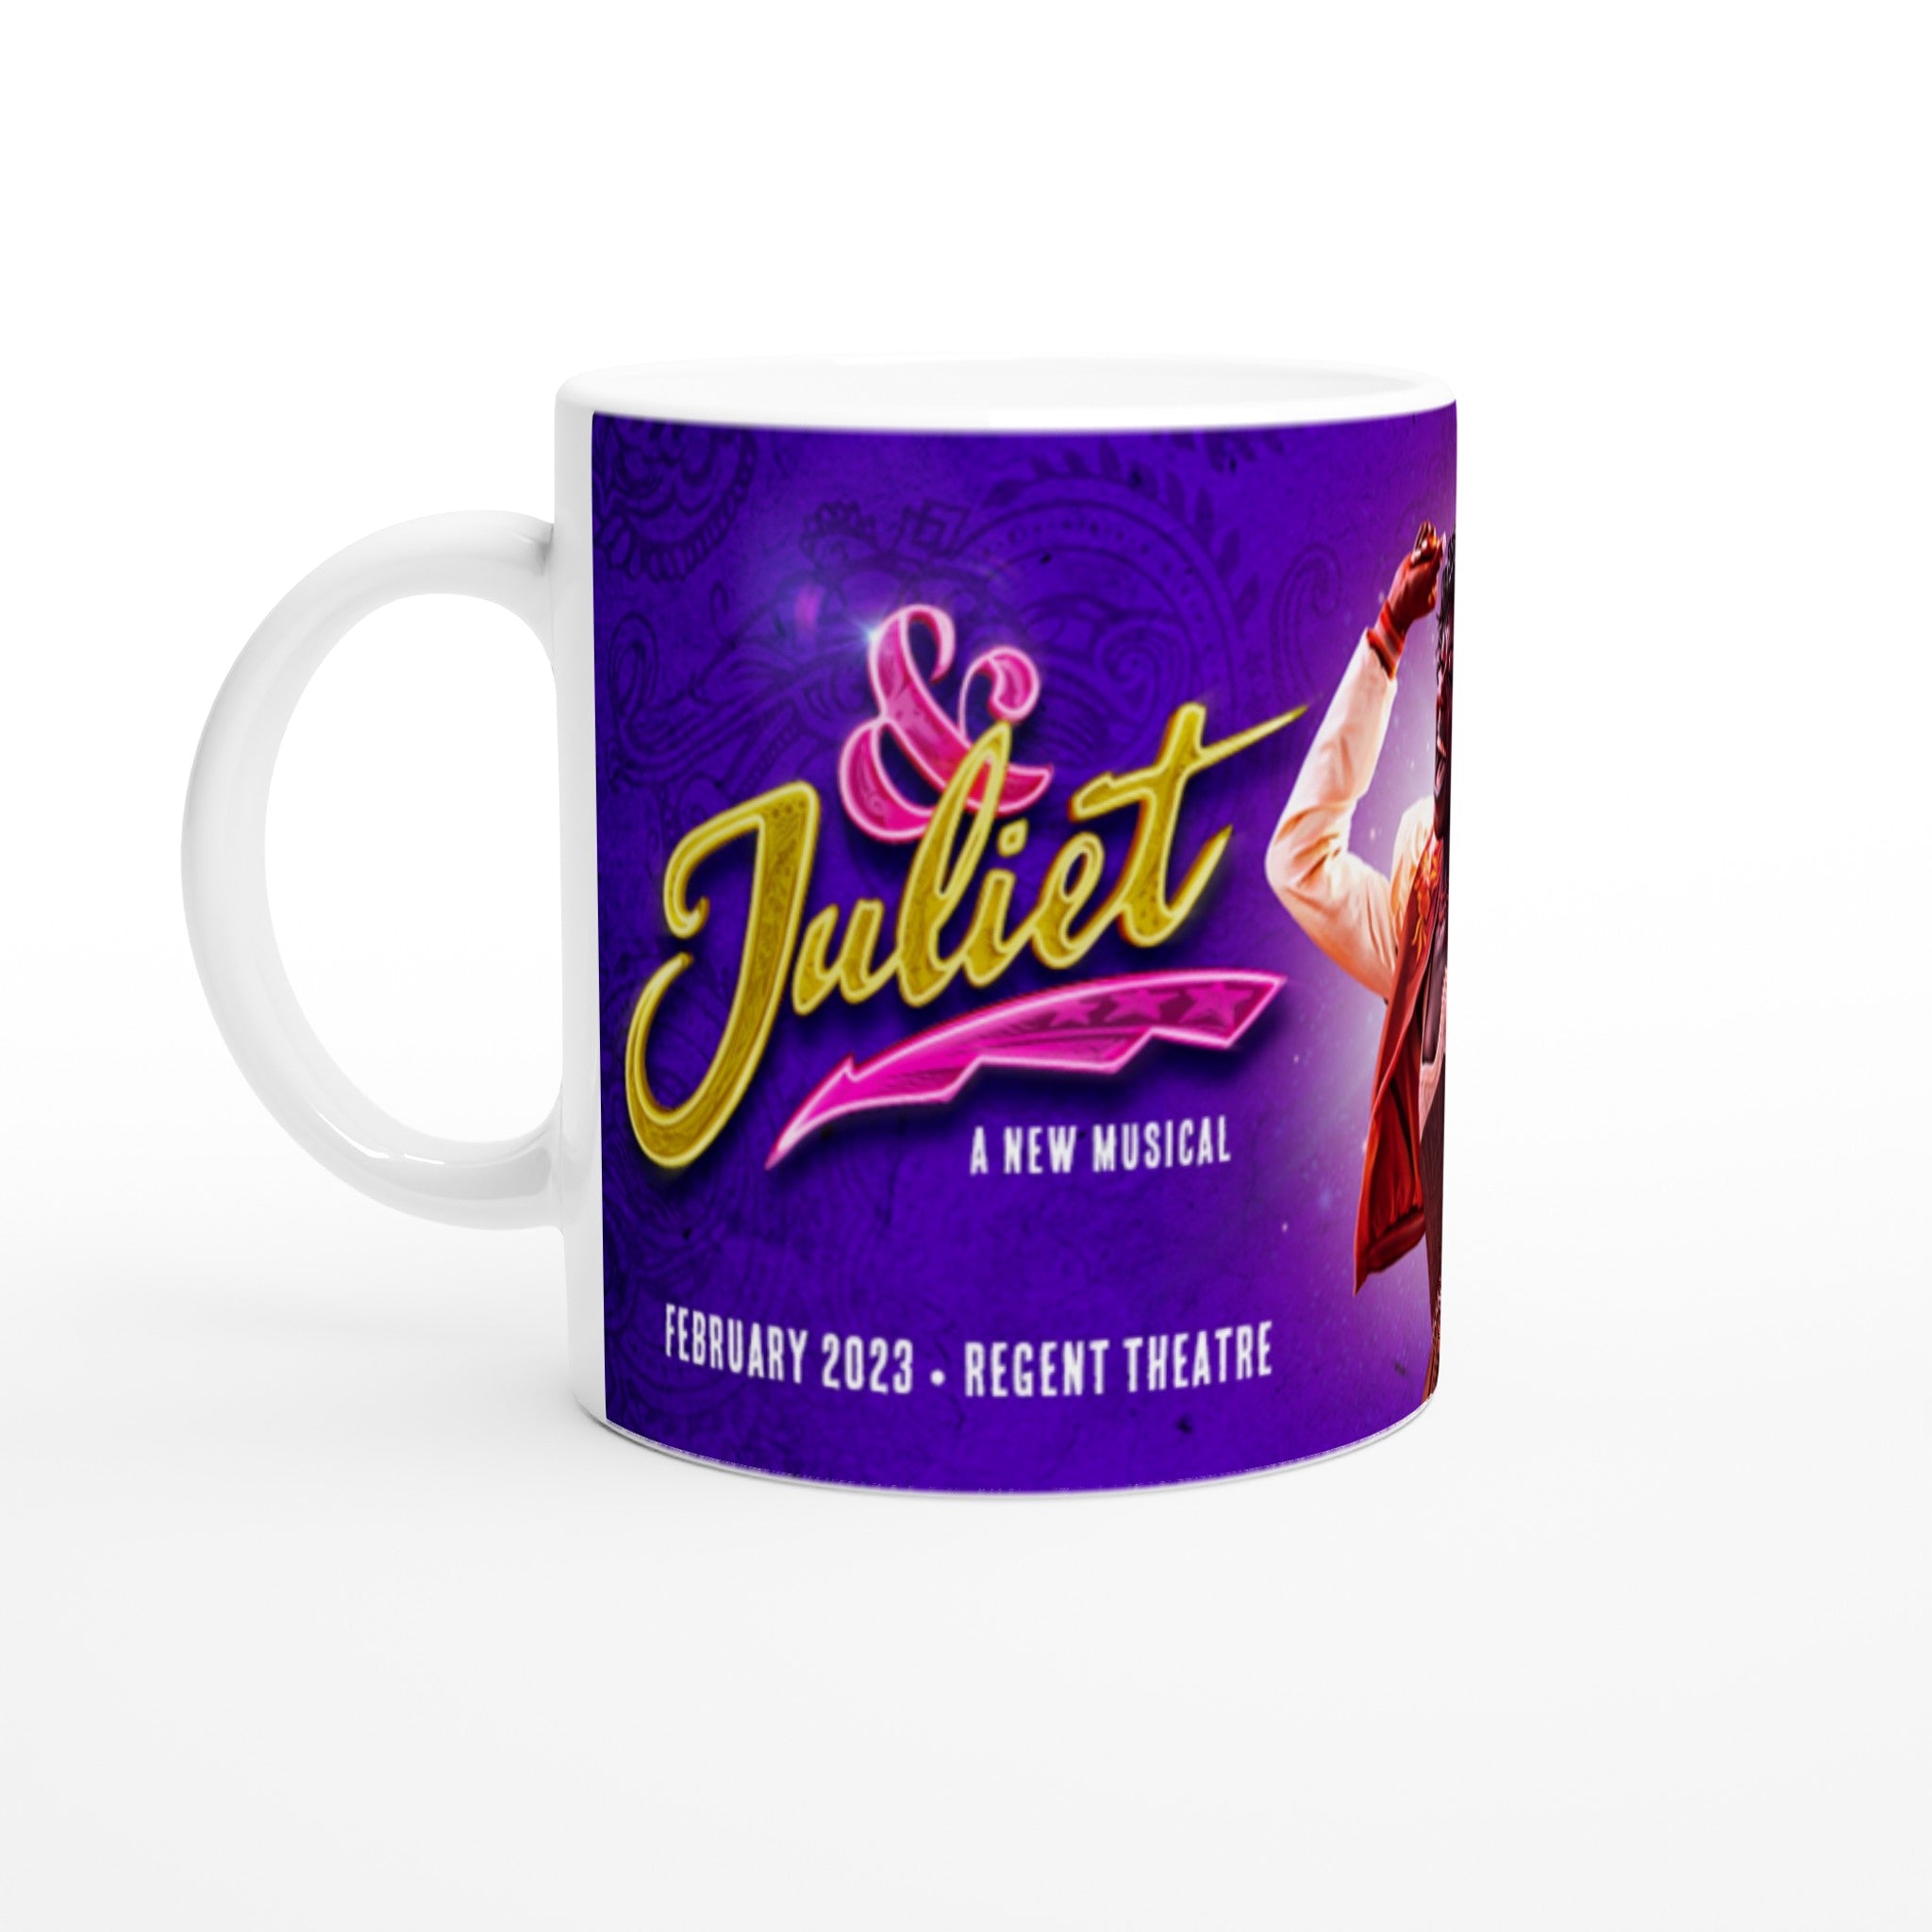 https://creationsbychrisandcarlos.store/products/juliet-white-11oz-ceramic-mug